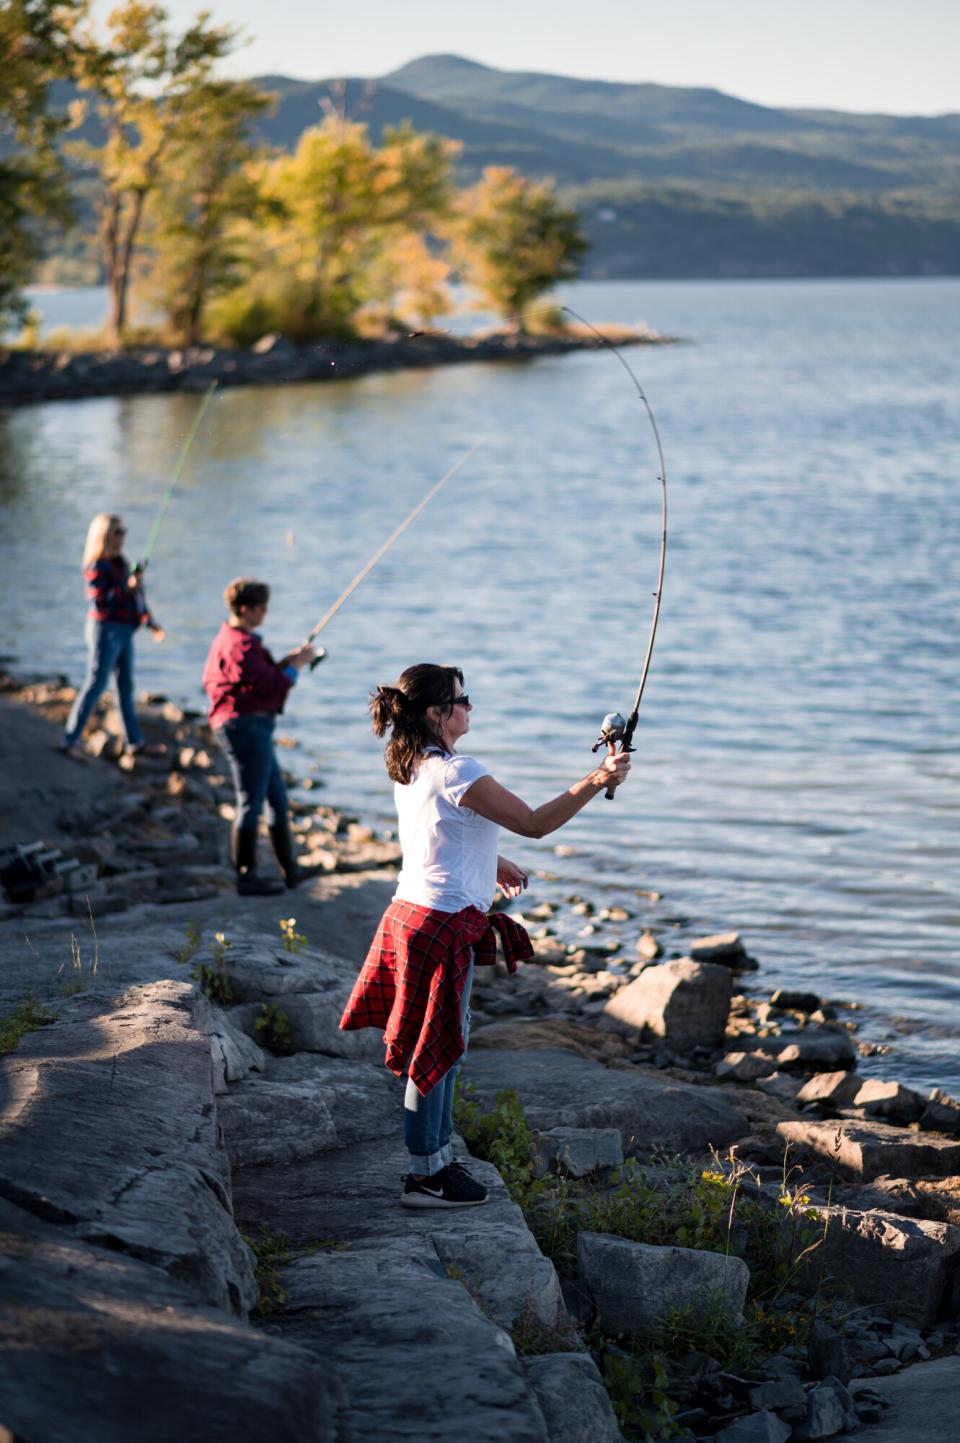 Women casting fishing lines from a rocky lake shoreline.